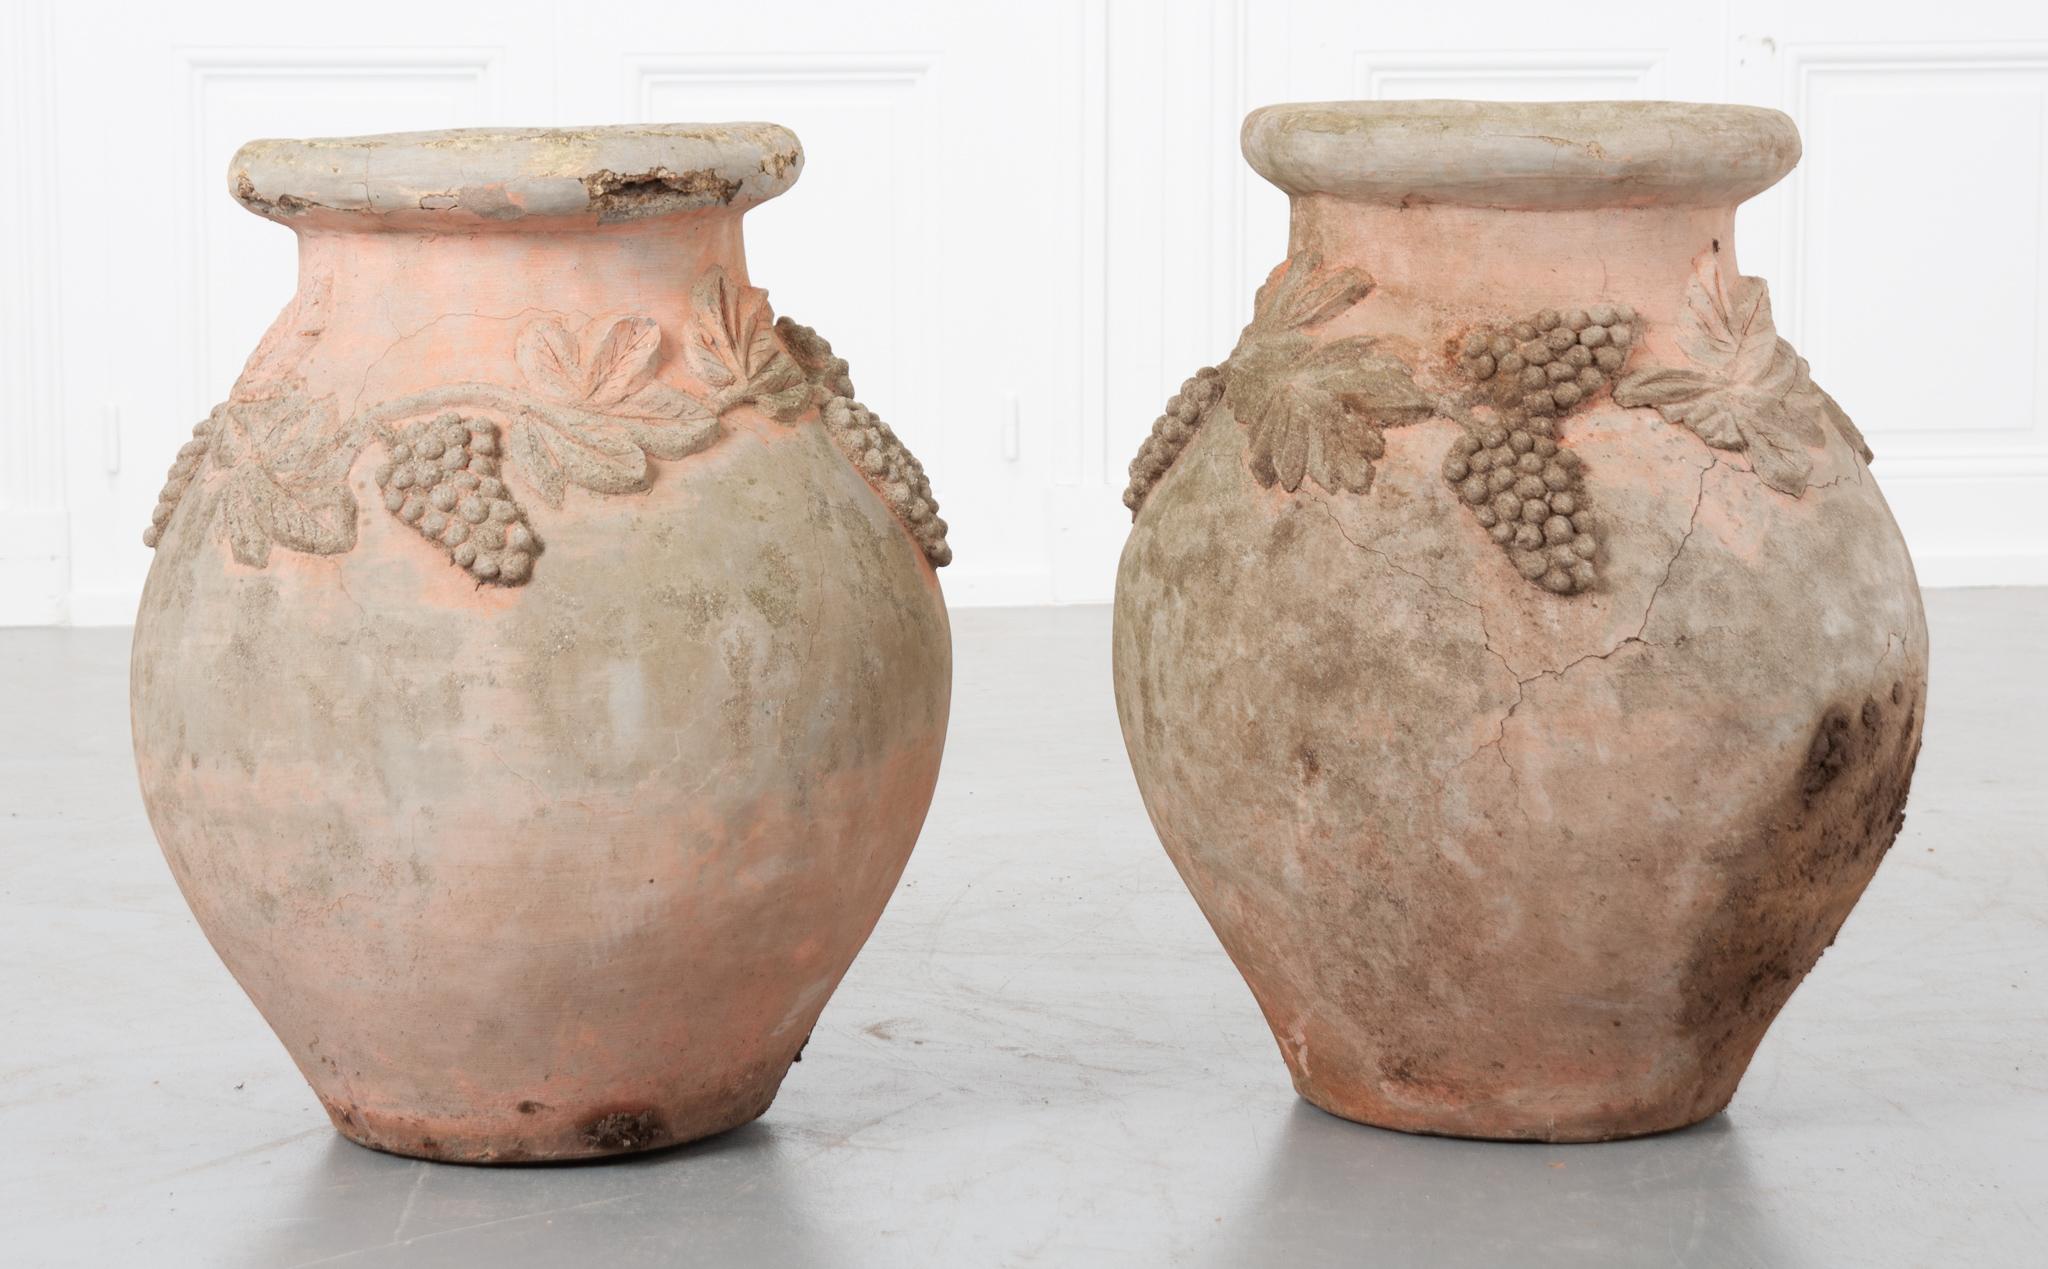 Age has distressed these pots quite distinctly and they will add character to any garden. They have a band of grapevine wrapping around the top perimeter and have a peach/pink color.